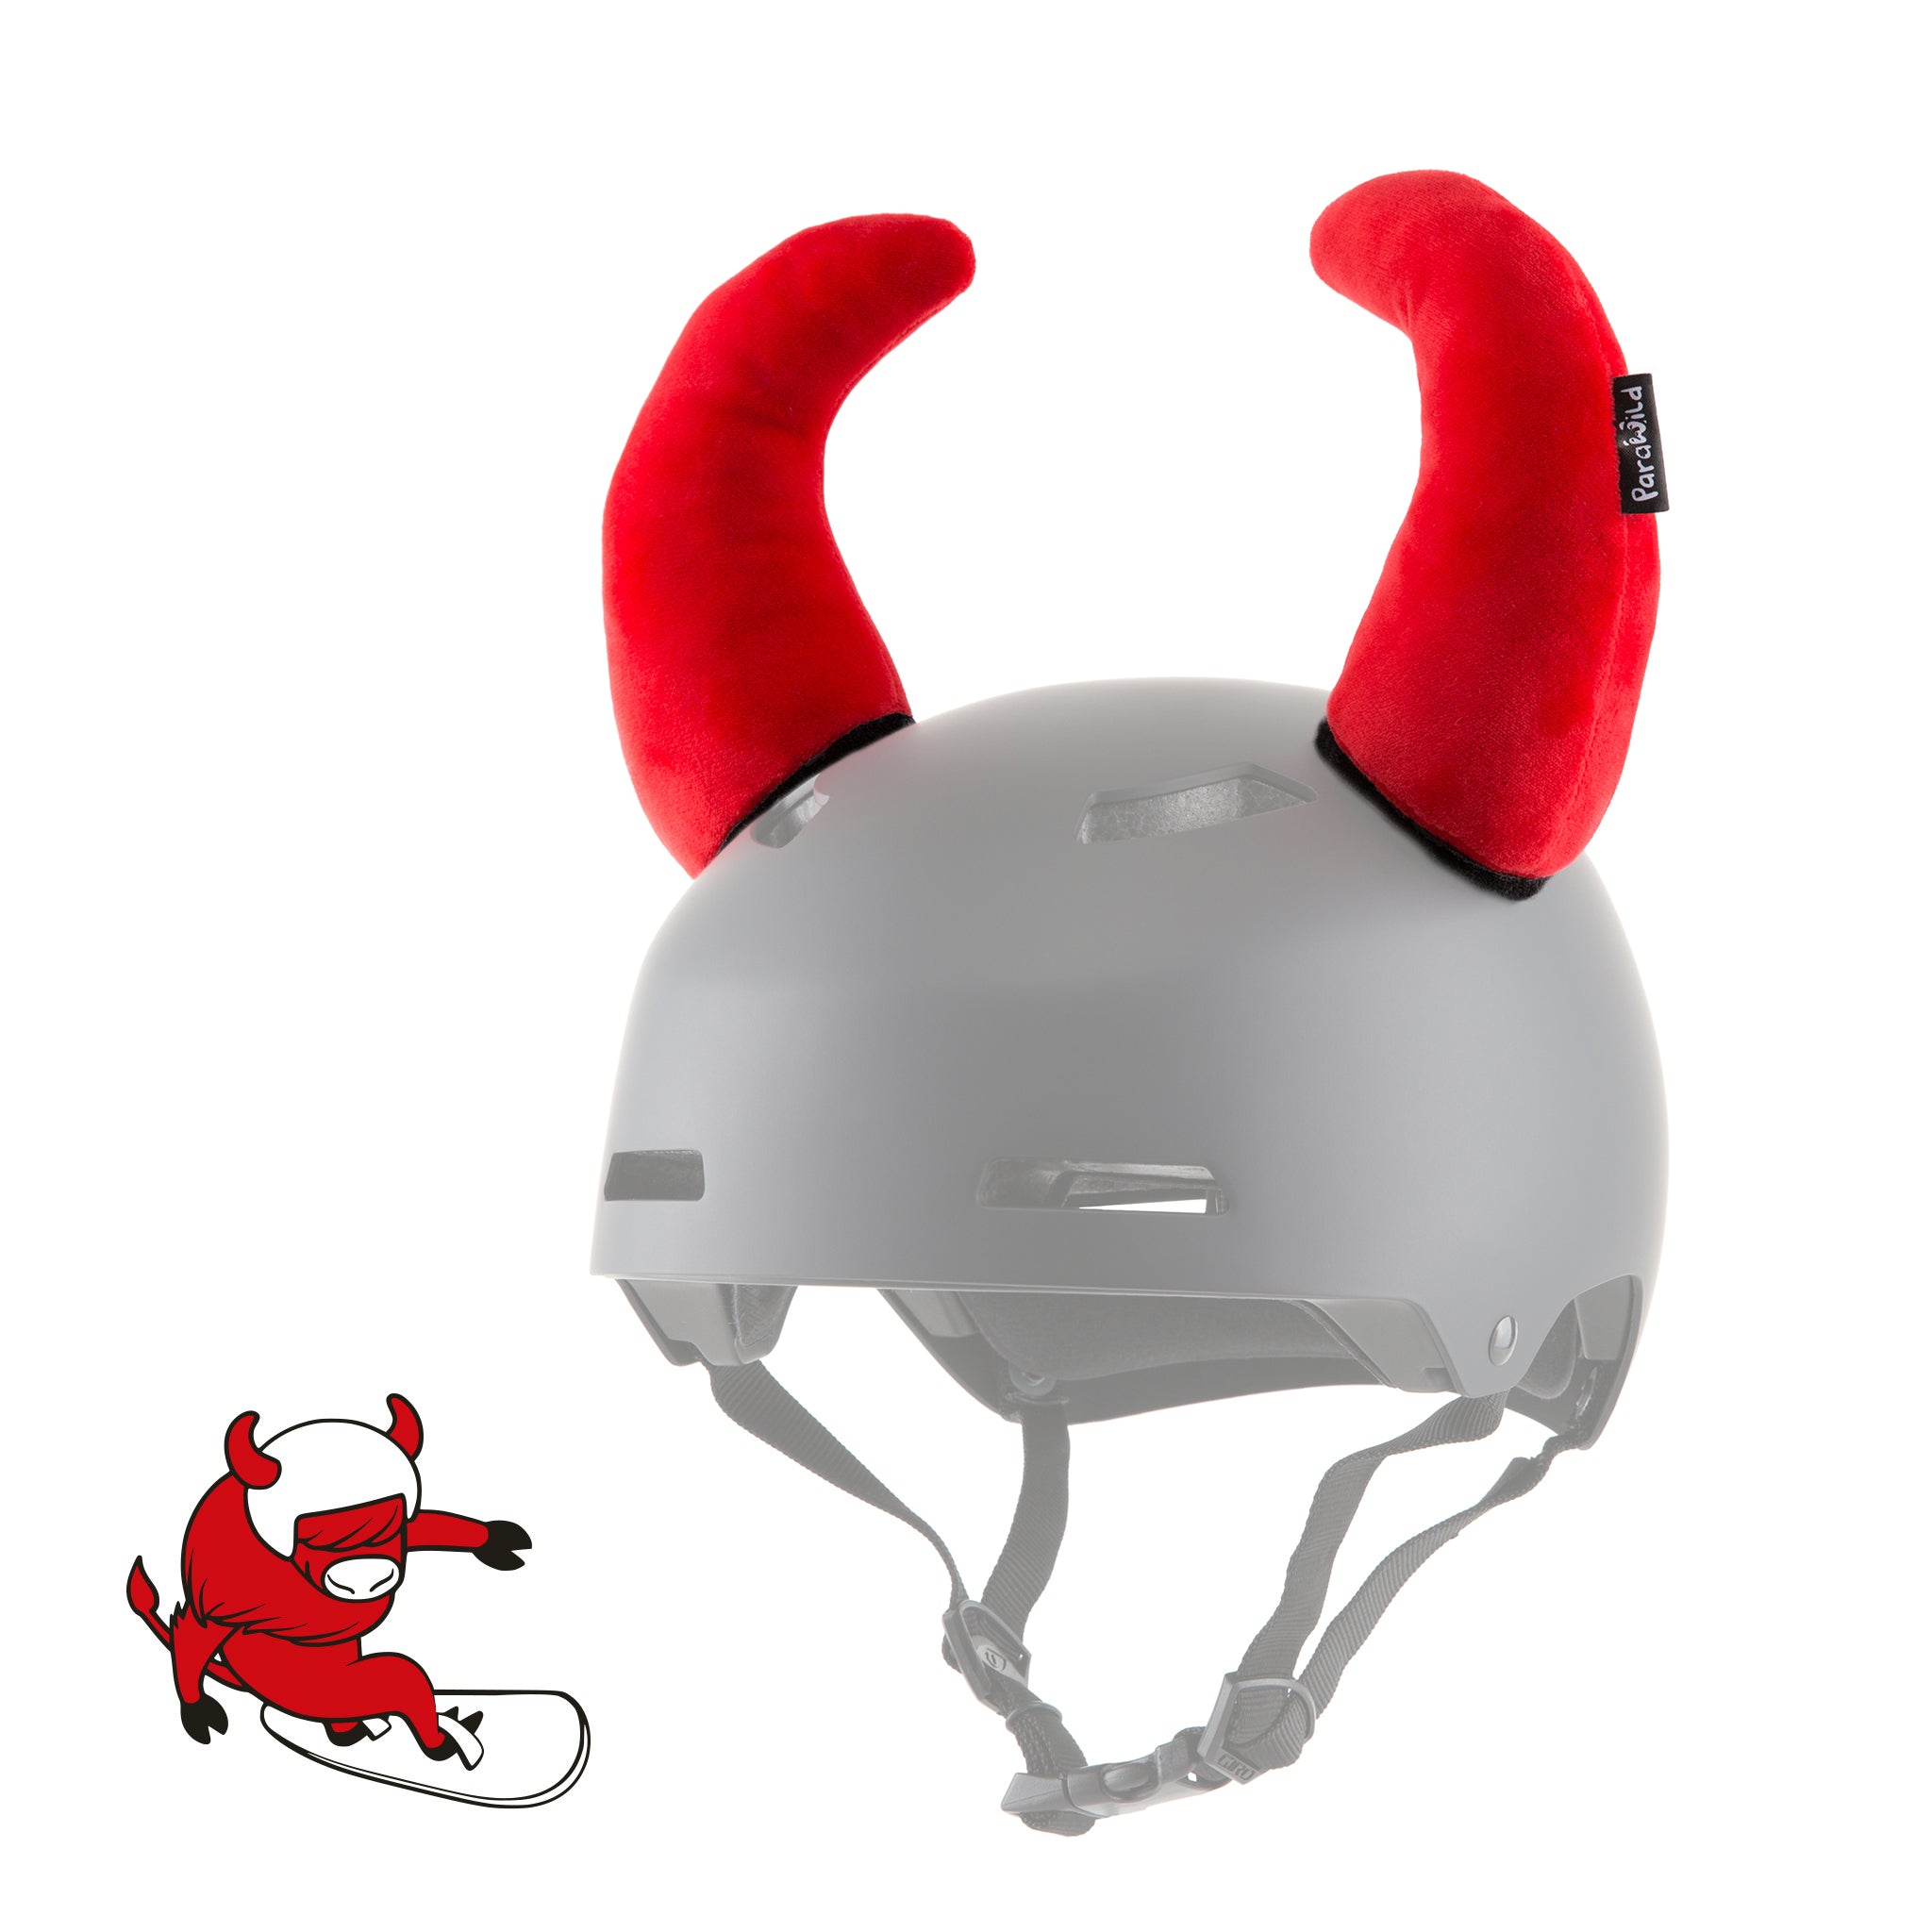 Tatanka the Bison Helmet Horns Accessory/Cover in Red